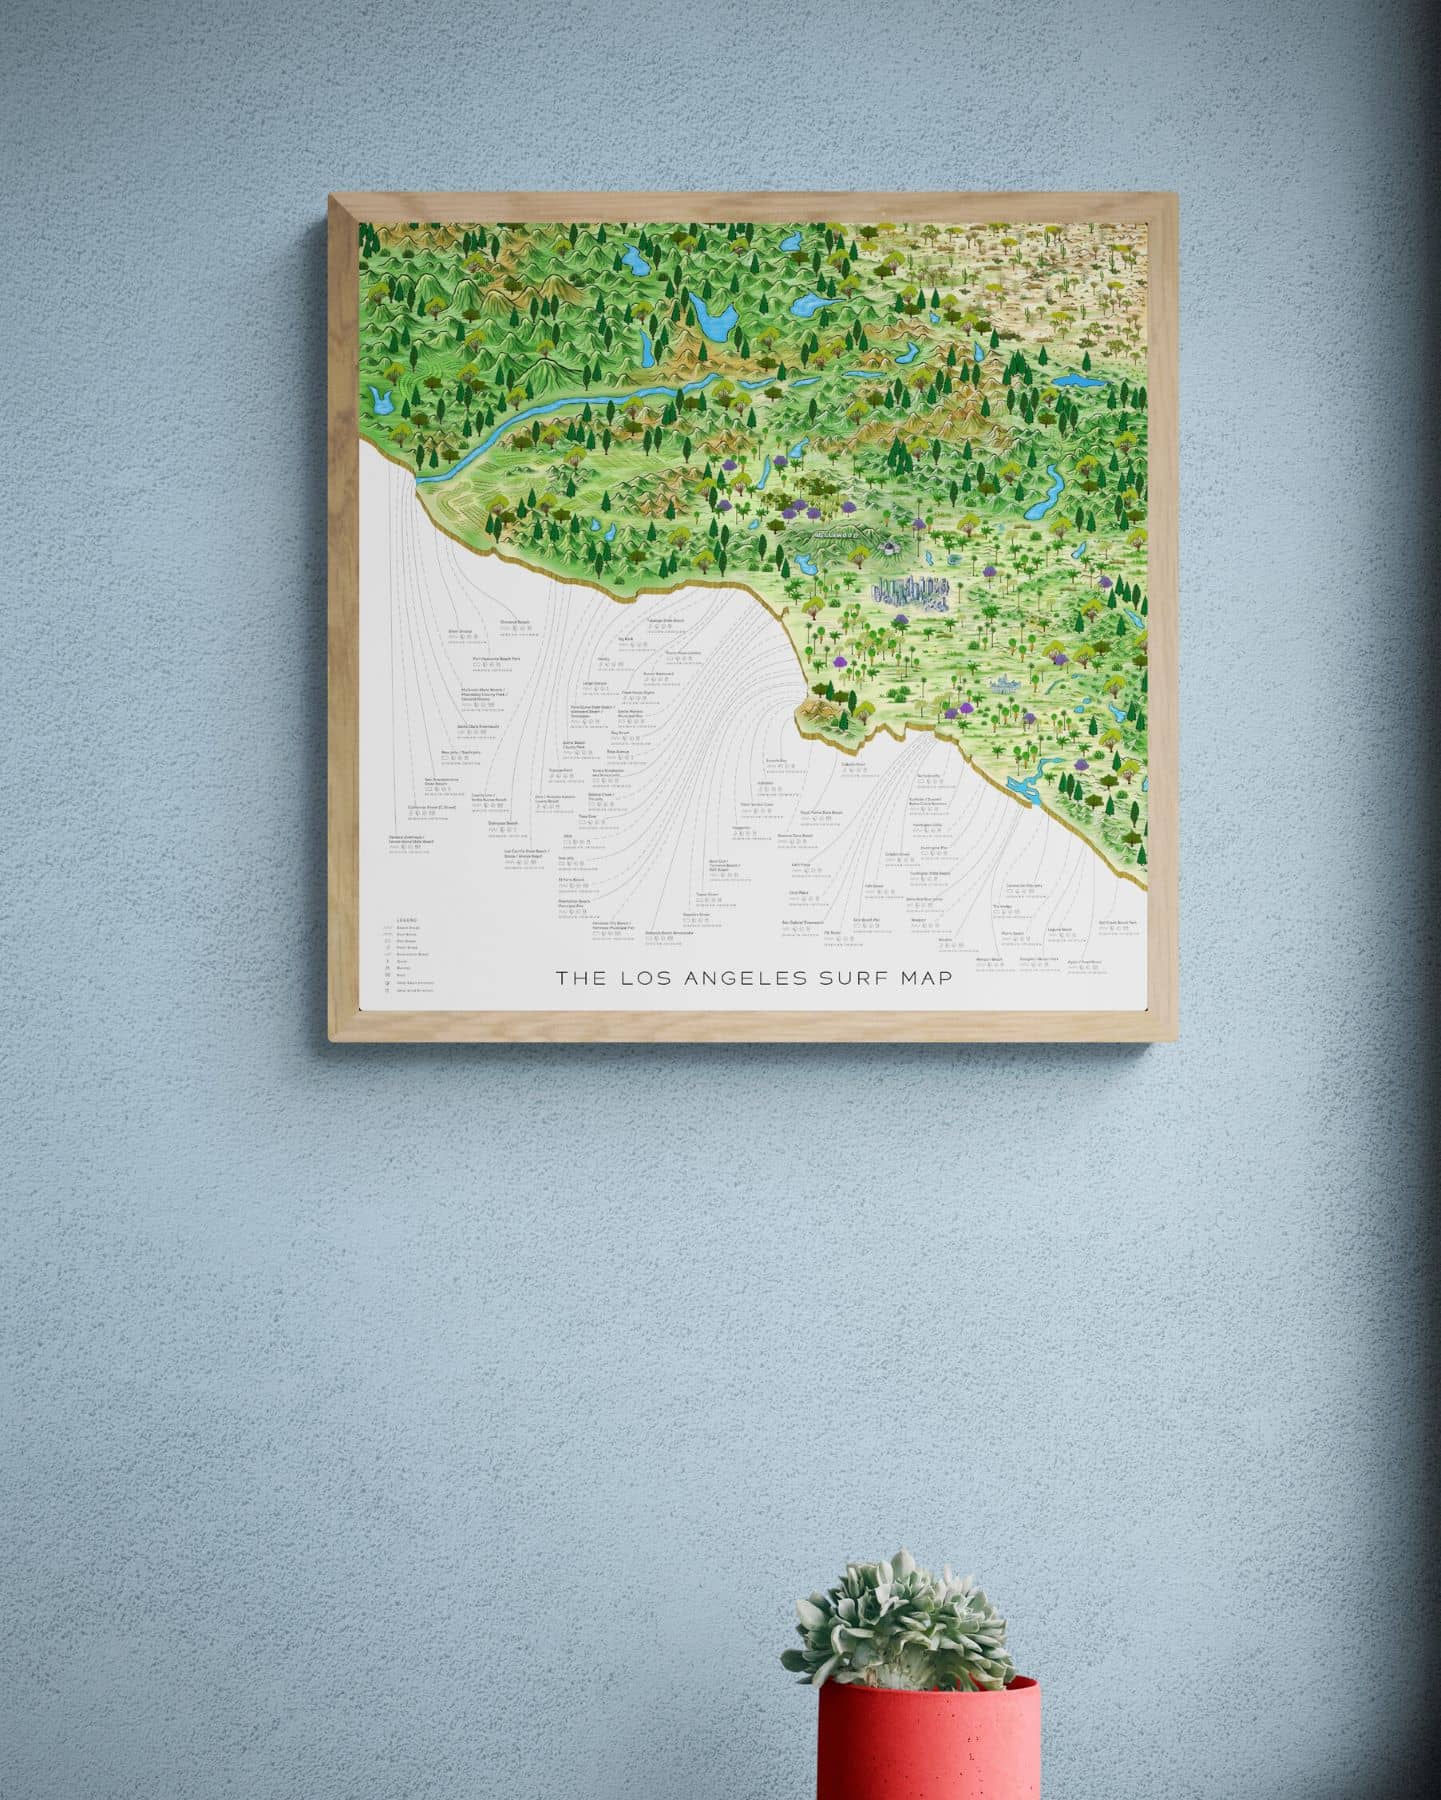 The Los Angeles Surf Map